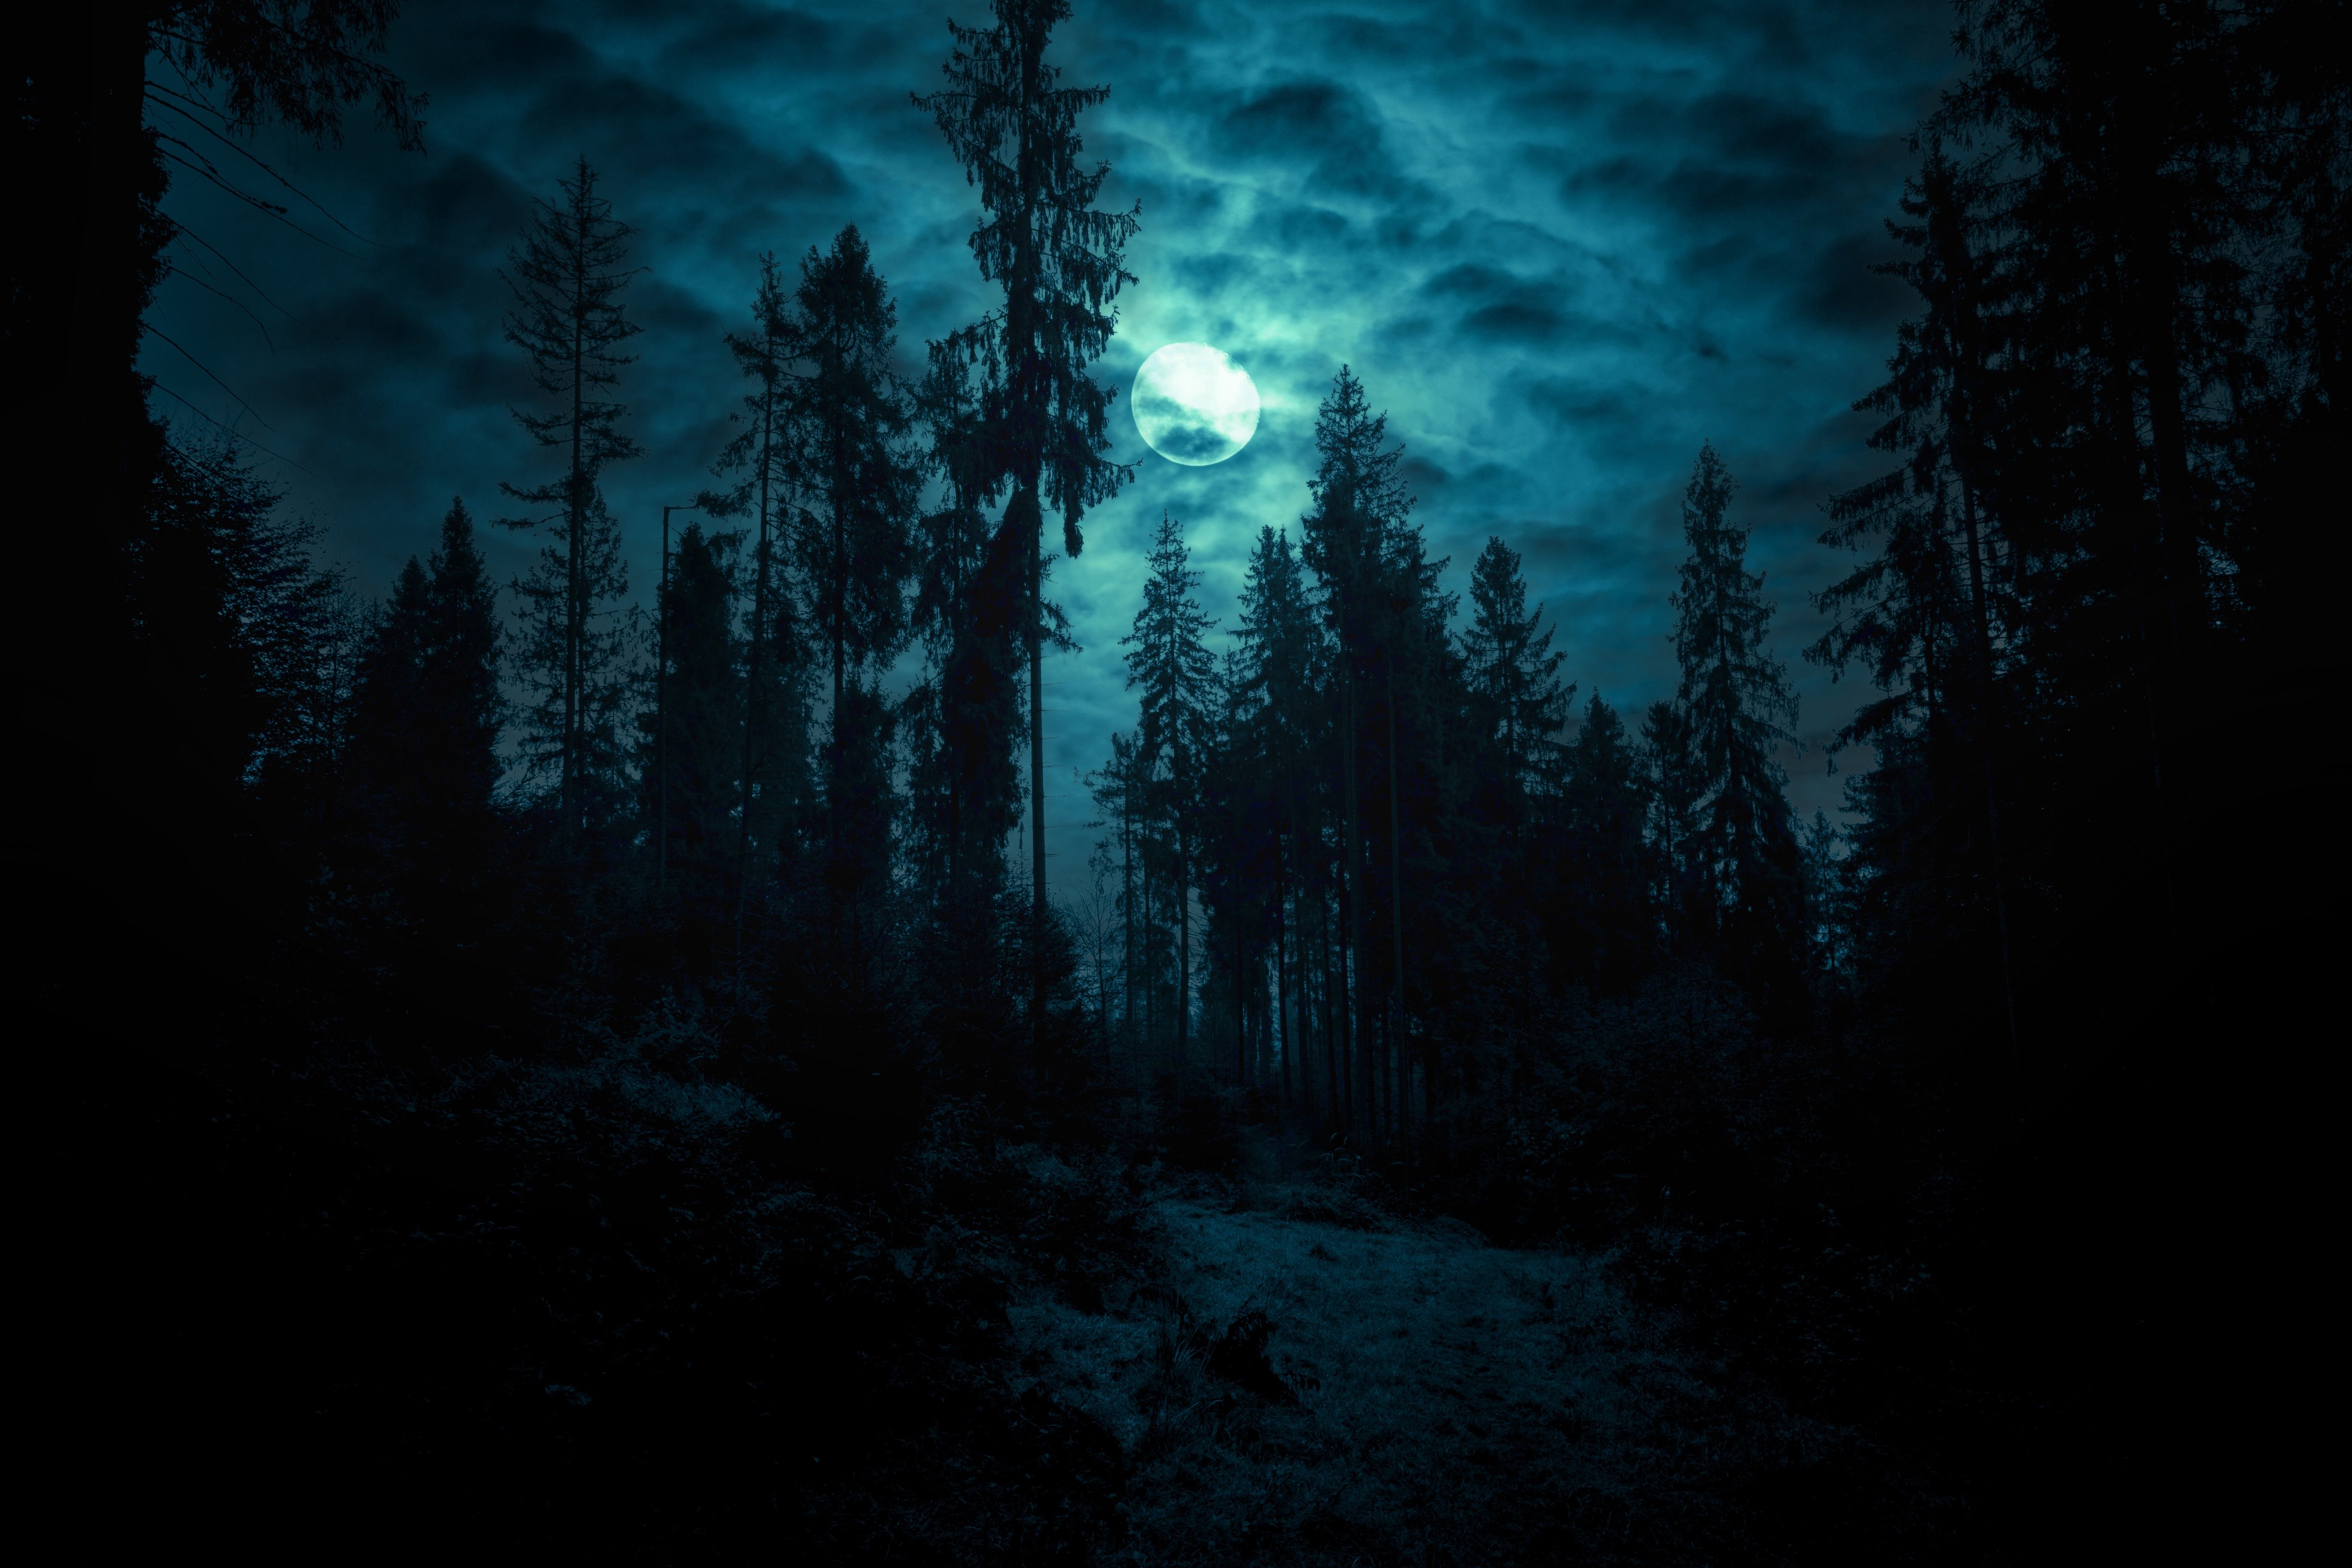 Full moon through the clouds over the spruce trees of magic mysterious night forest. | Source: Shutterstock